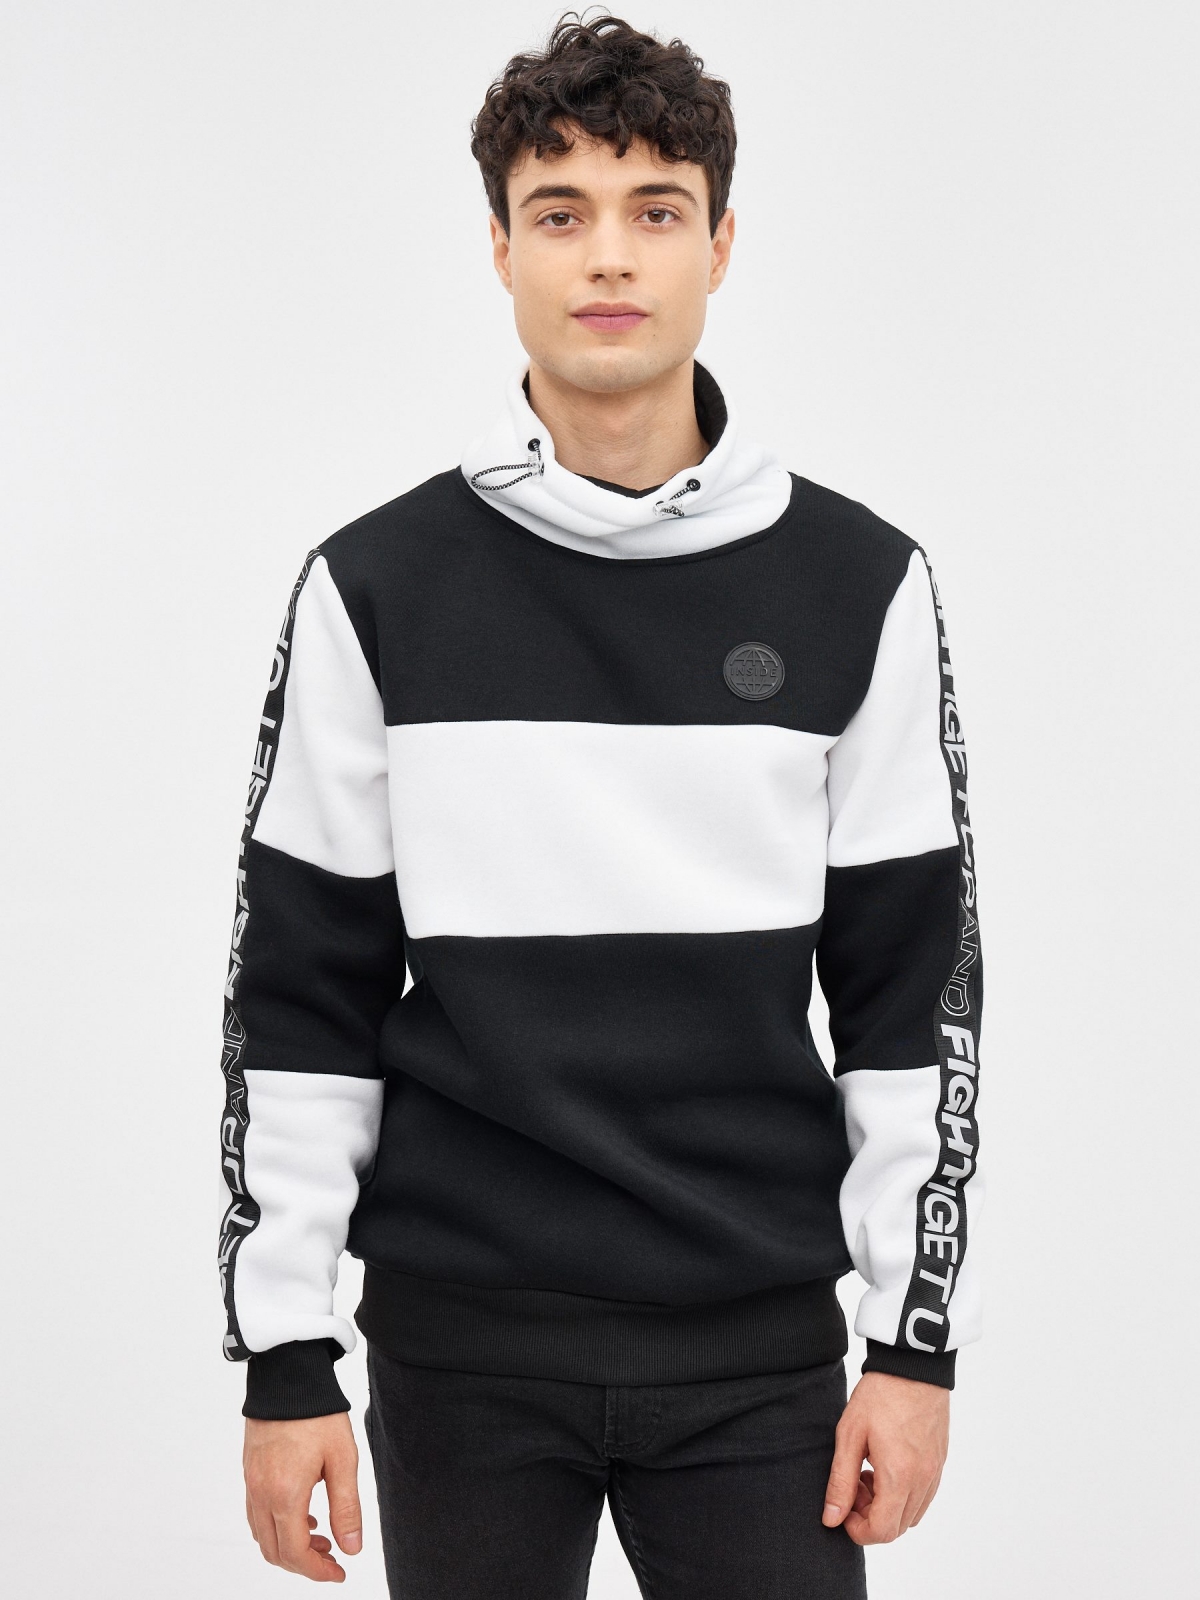 Sweatshirt with wrap-around collar black middle front view